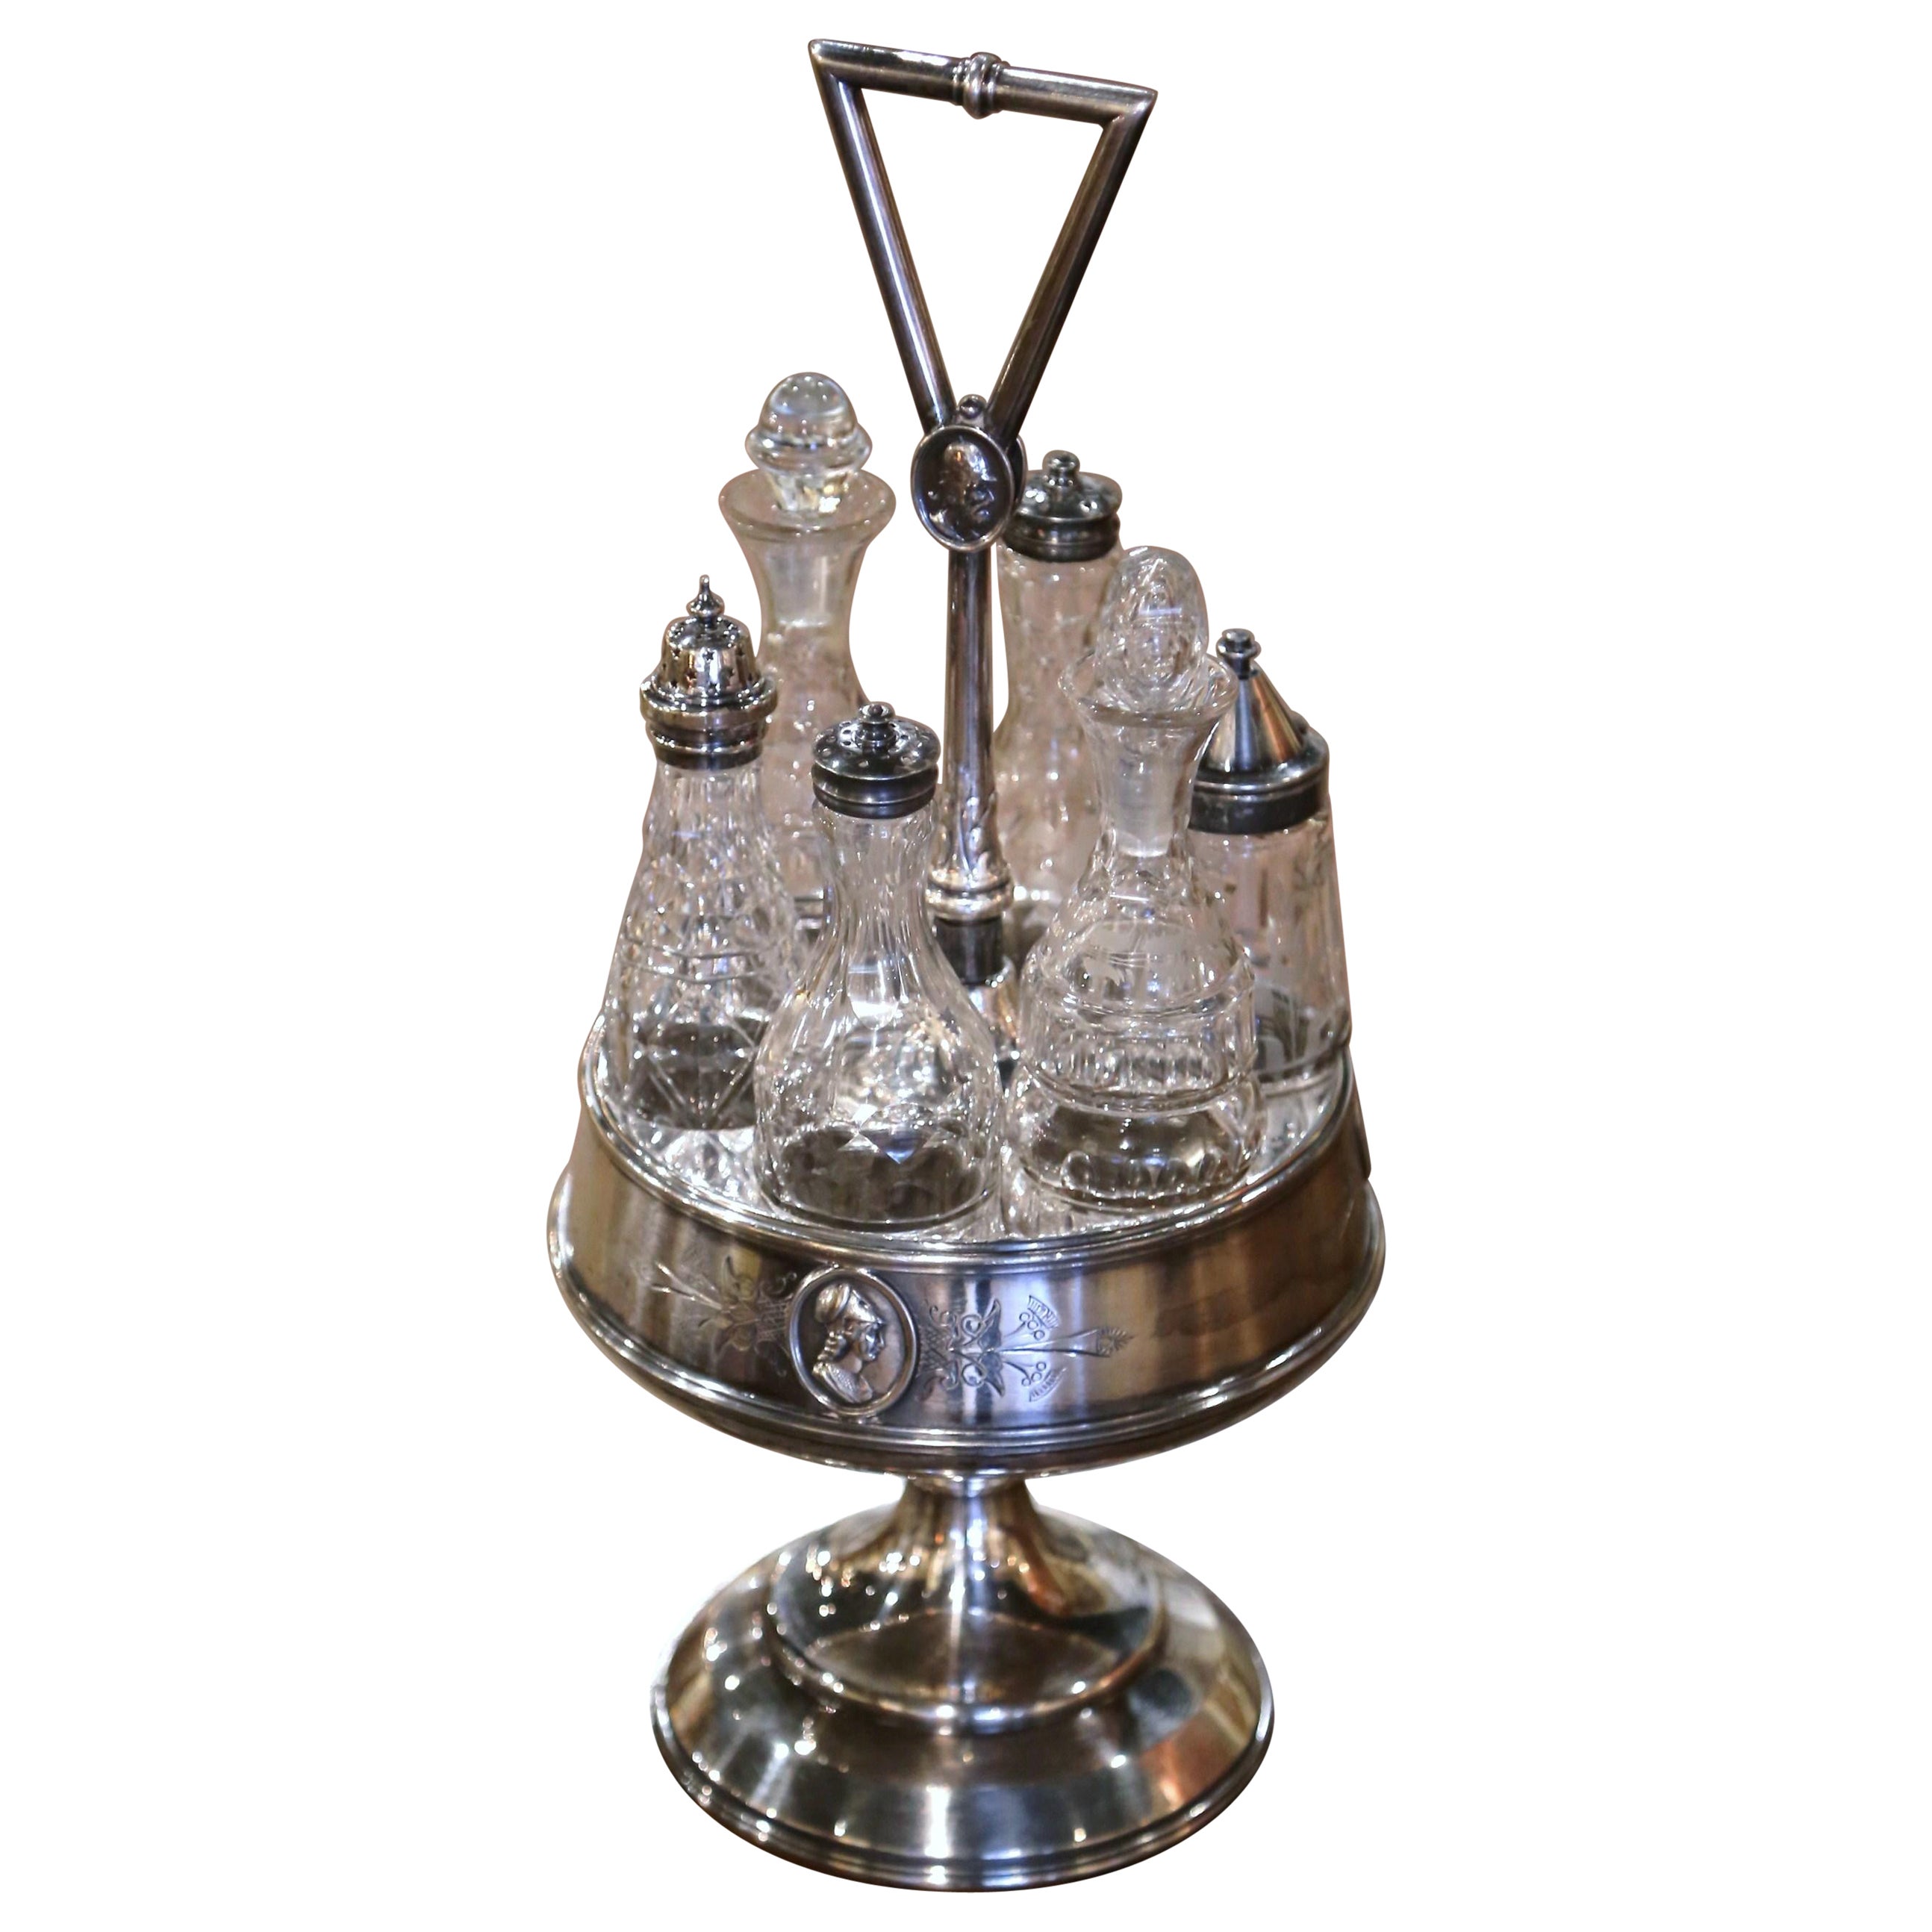 19th Century English Silver and Crystal Cruet Set Complete with Six Bottles